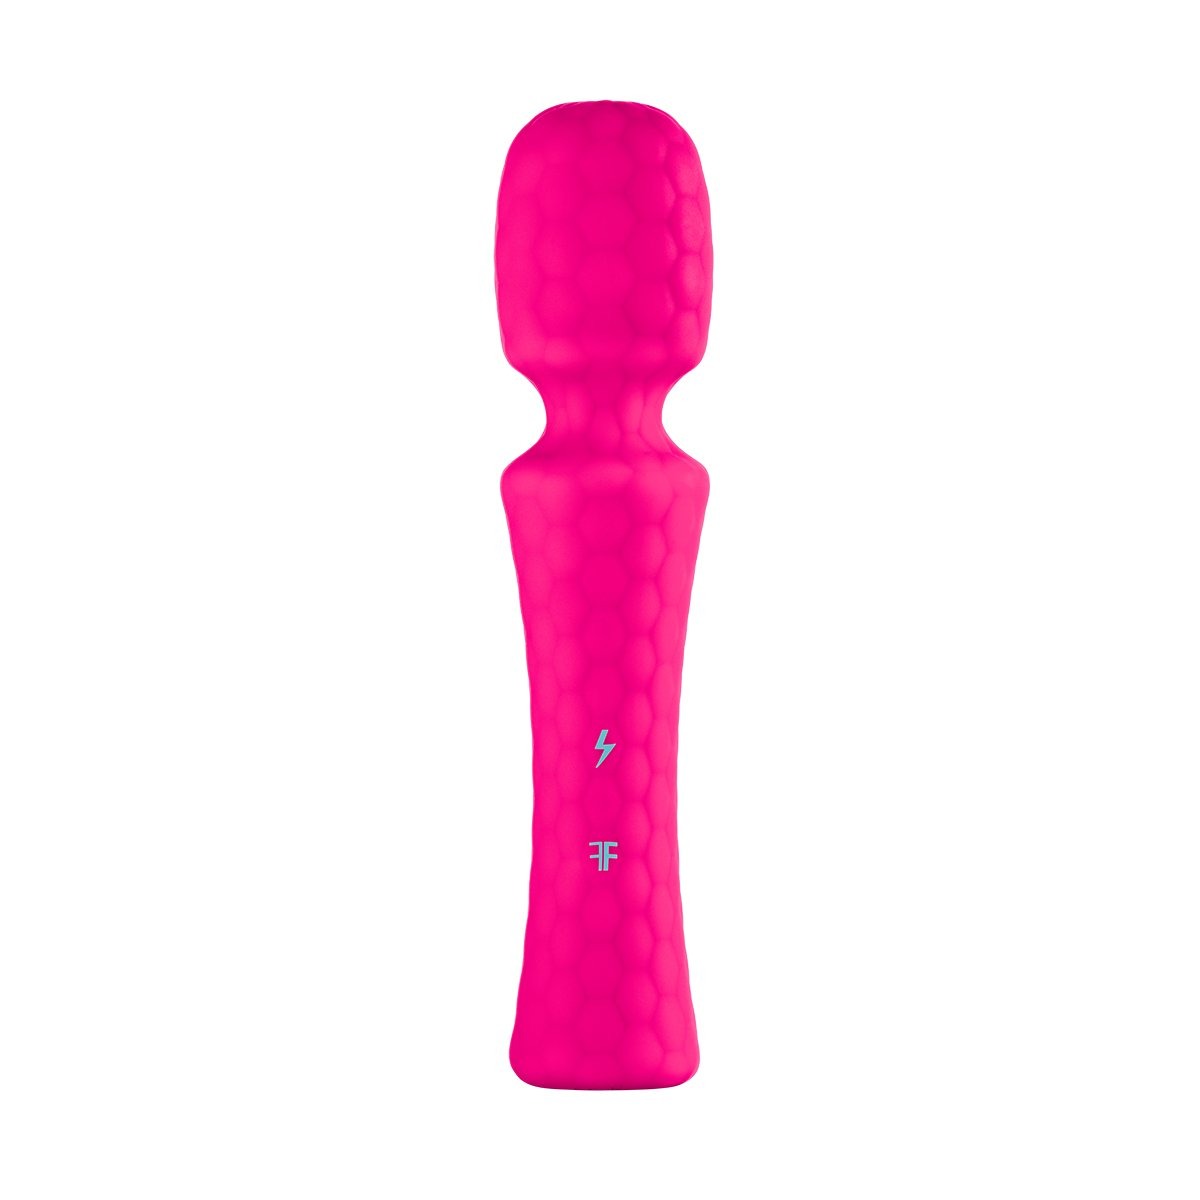 Femme Funn Ultra Wand - Buy At Luxury Toy X - Free 3-Day Shipping